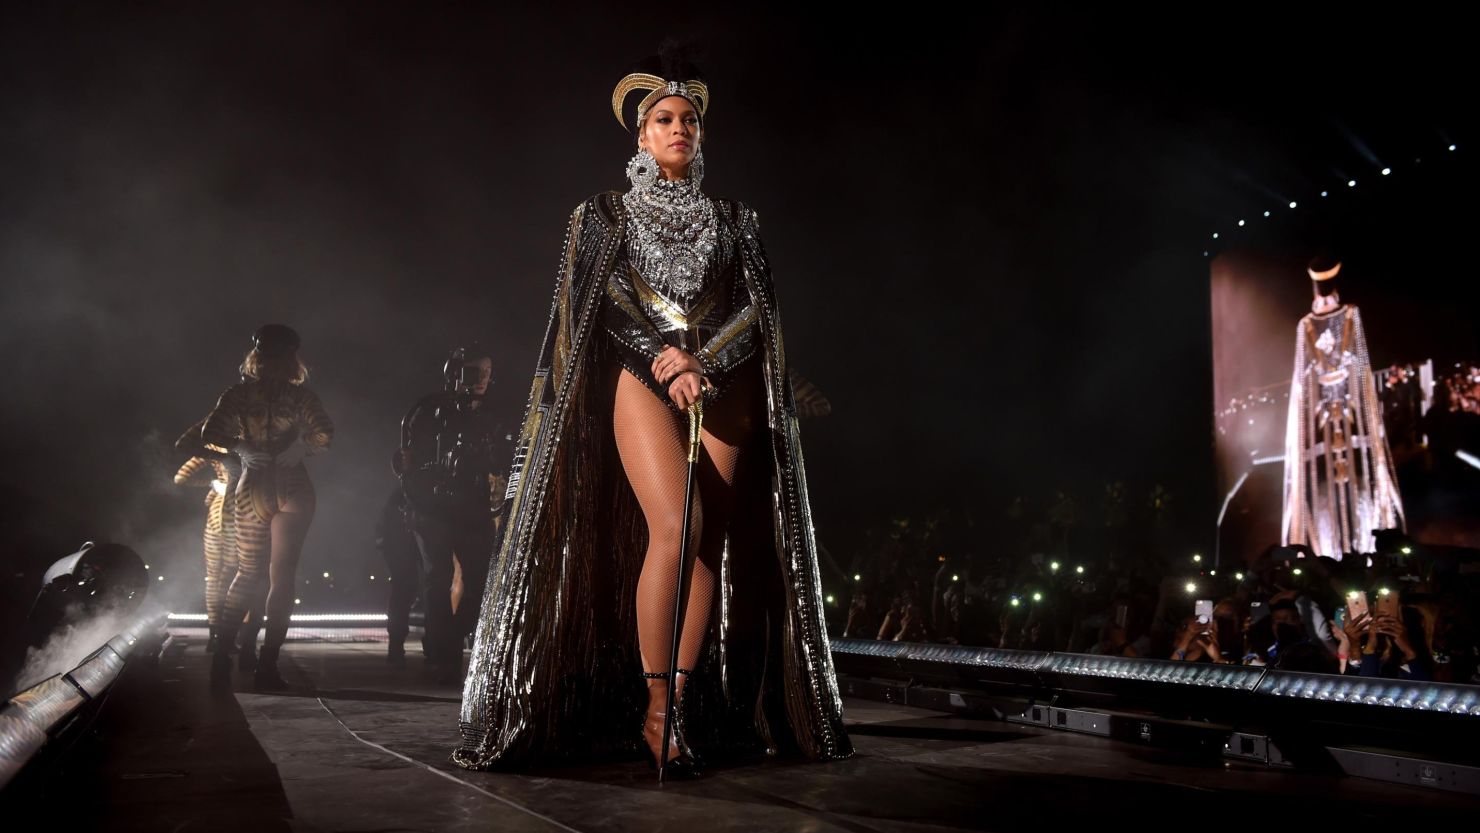 Beyoncé was the first black woman to headline the Coachella Valley Music and Arts Special.